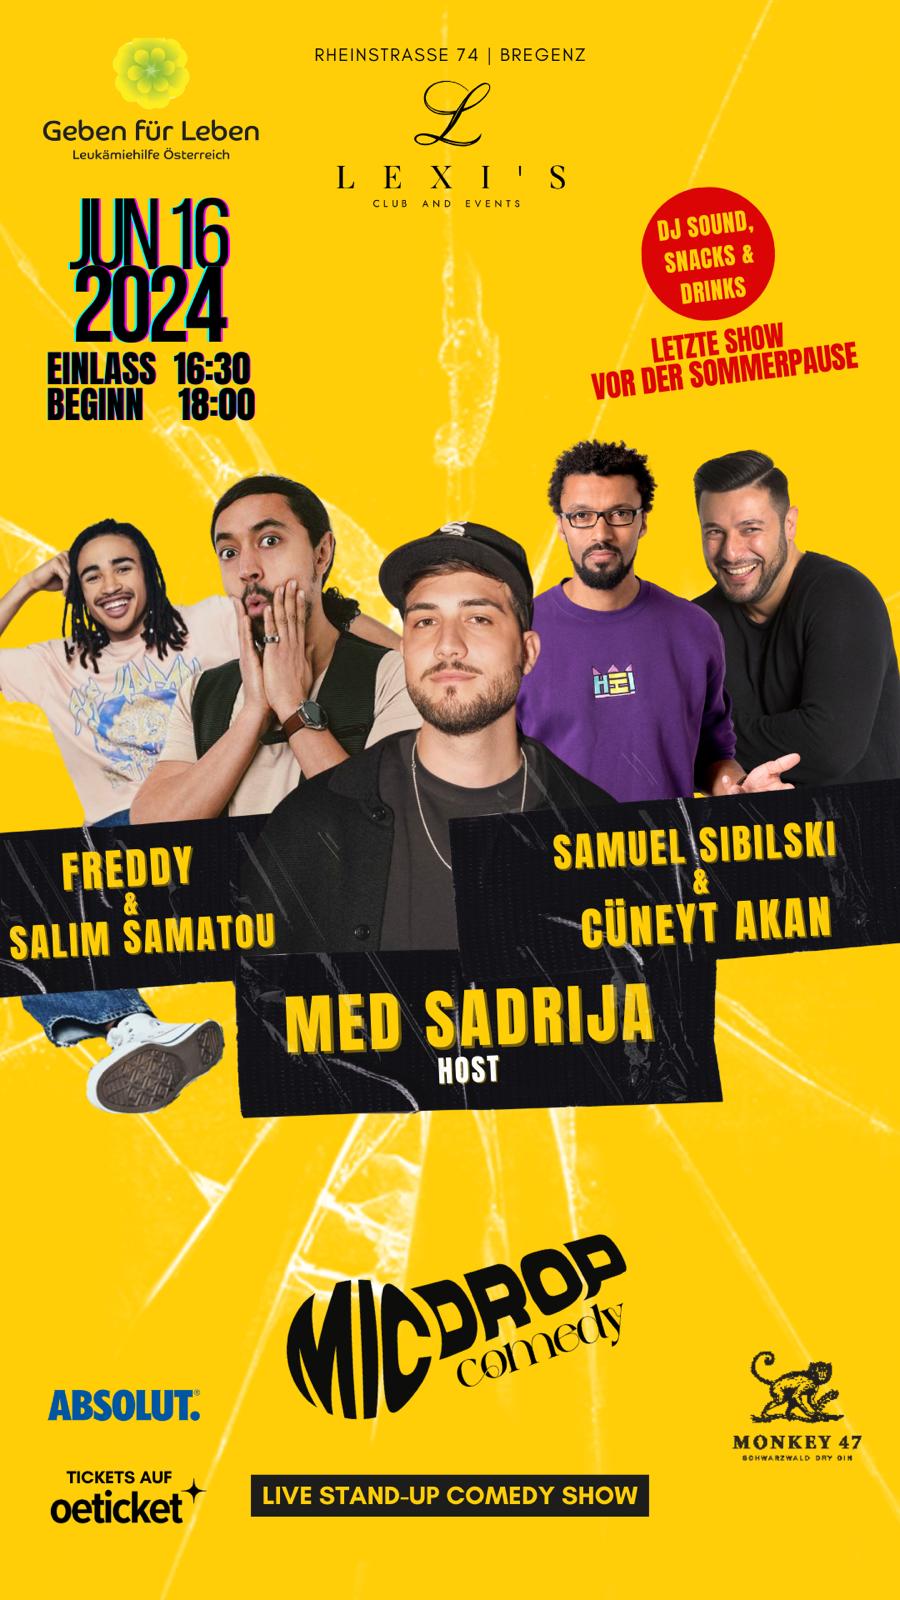 Live Stand-Up Comedy Show